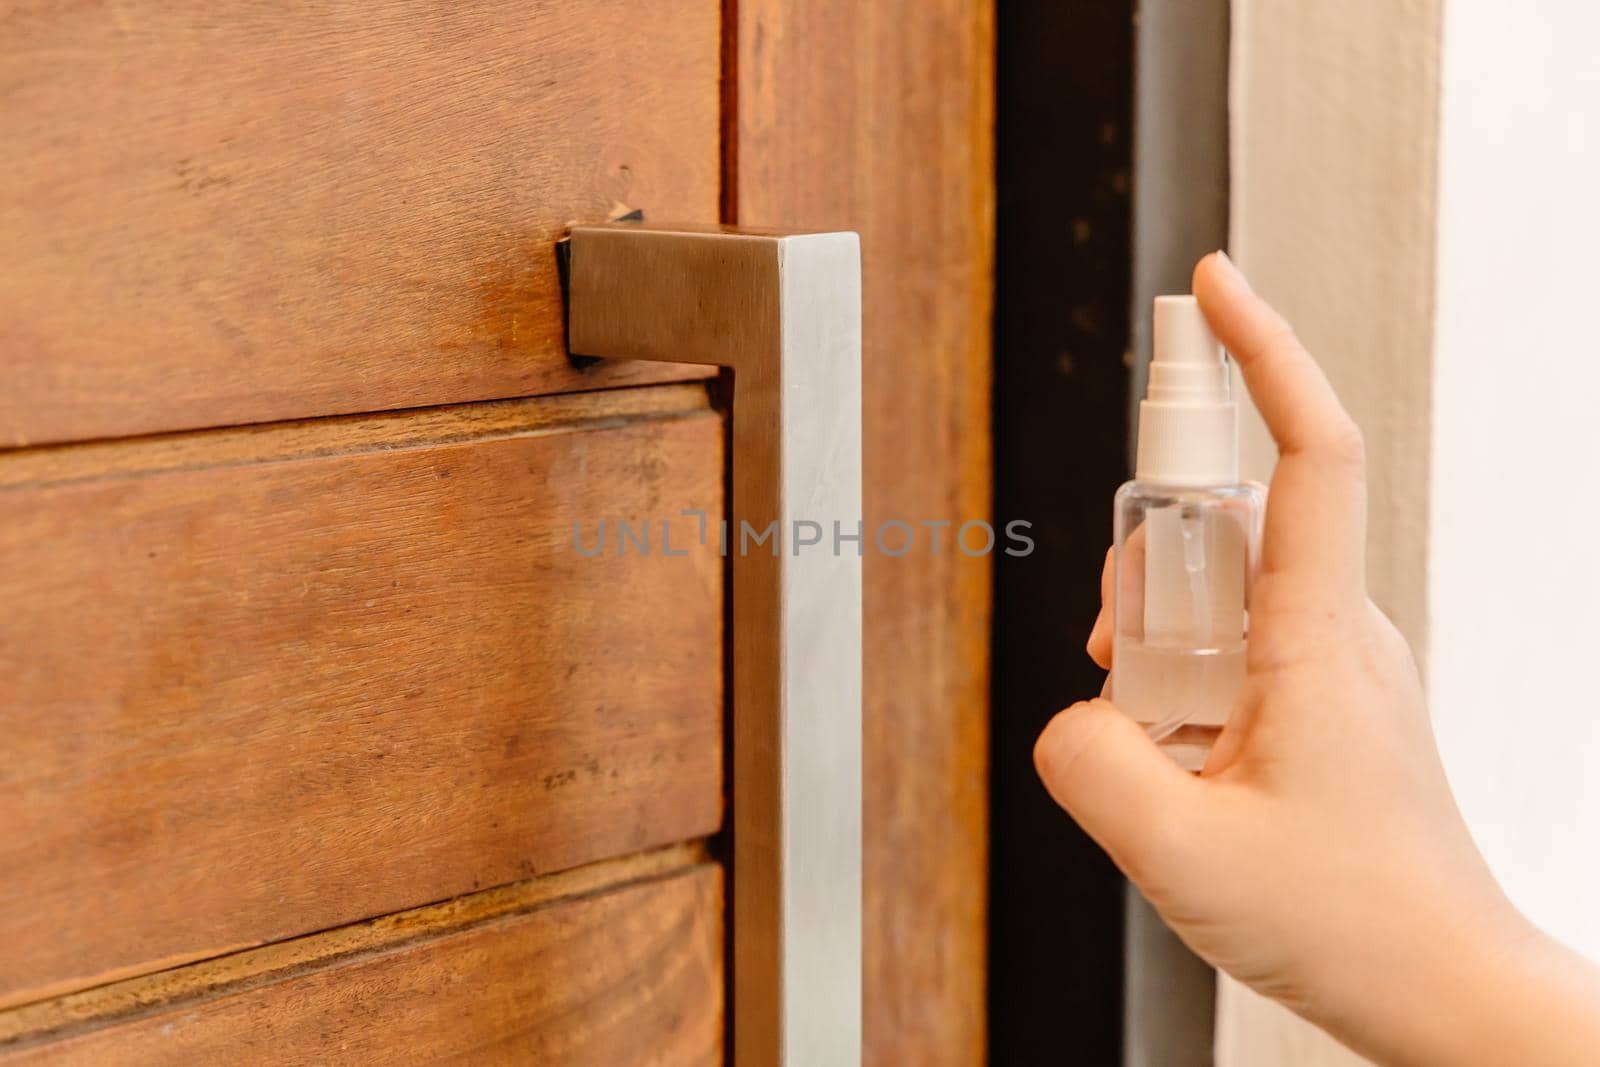 Closeup people using alcohol disinfectant spray cleaning door handle for preventing spreading of virus or germ when touching. by qualitystocks